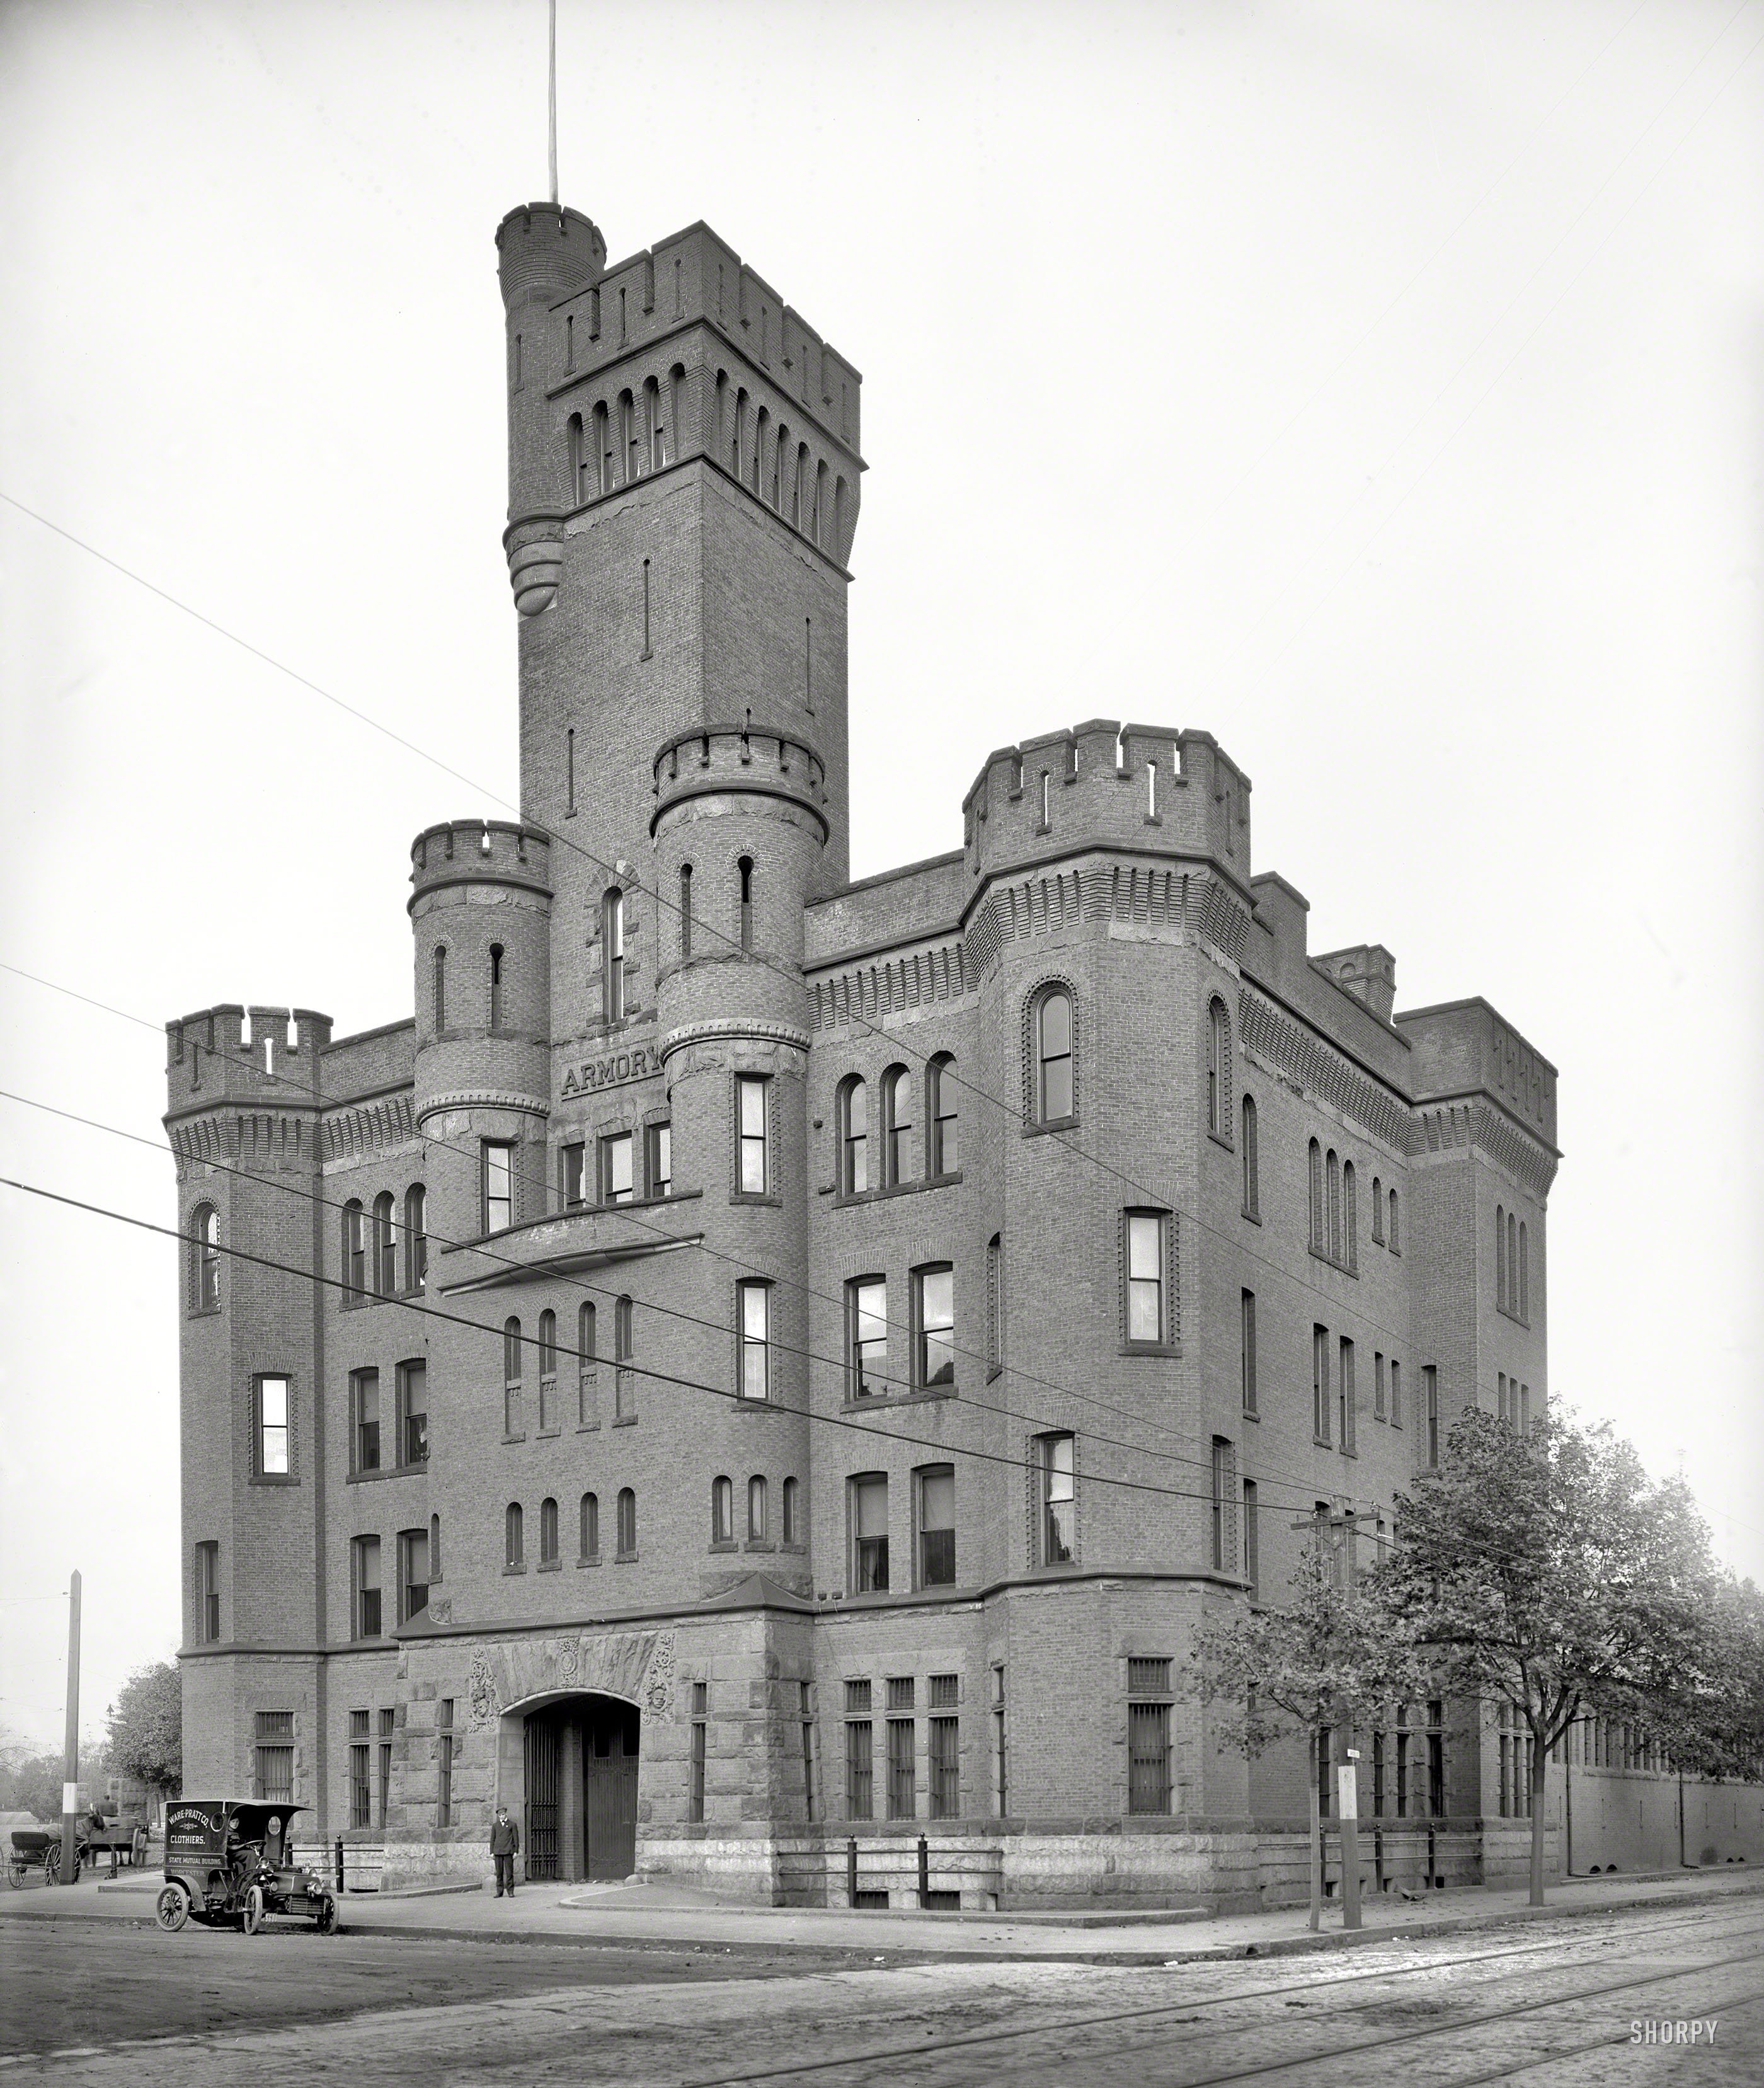 Circa 1906. "State National Guard Armory, Worcester, Mass." 8x10 inch dry plate glass negative, Detroit Publishing Company. View full size.